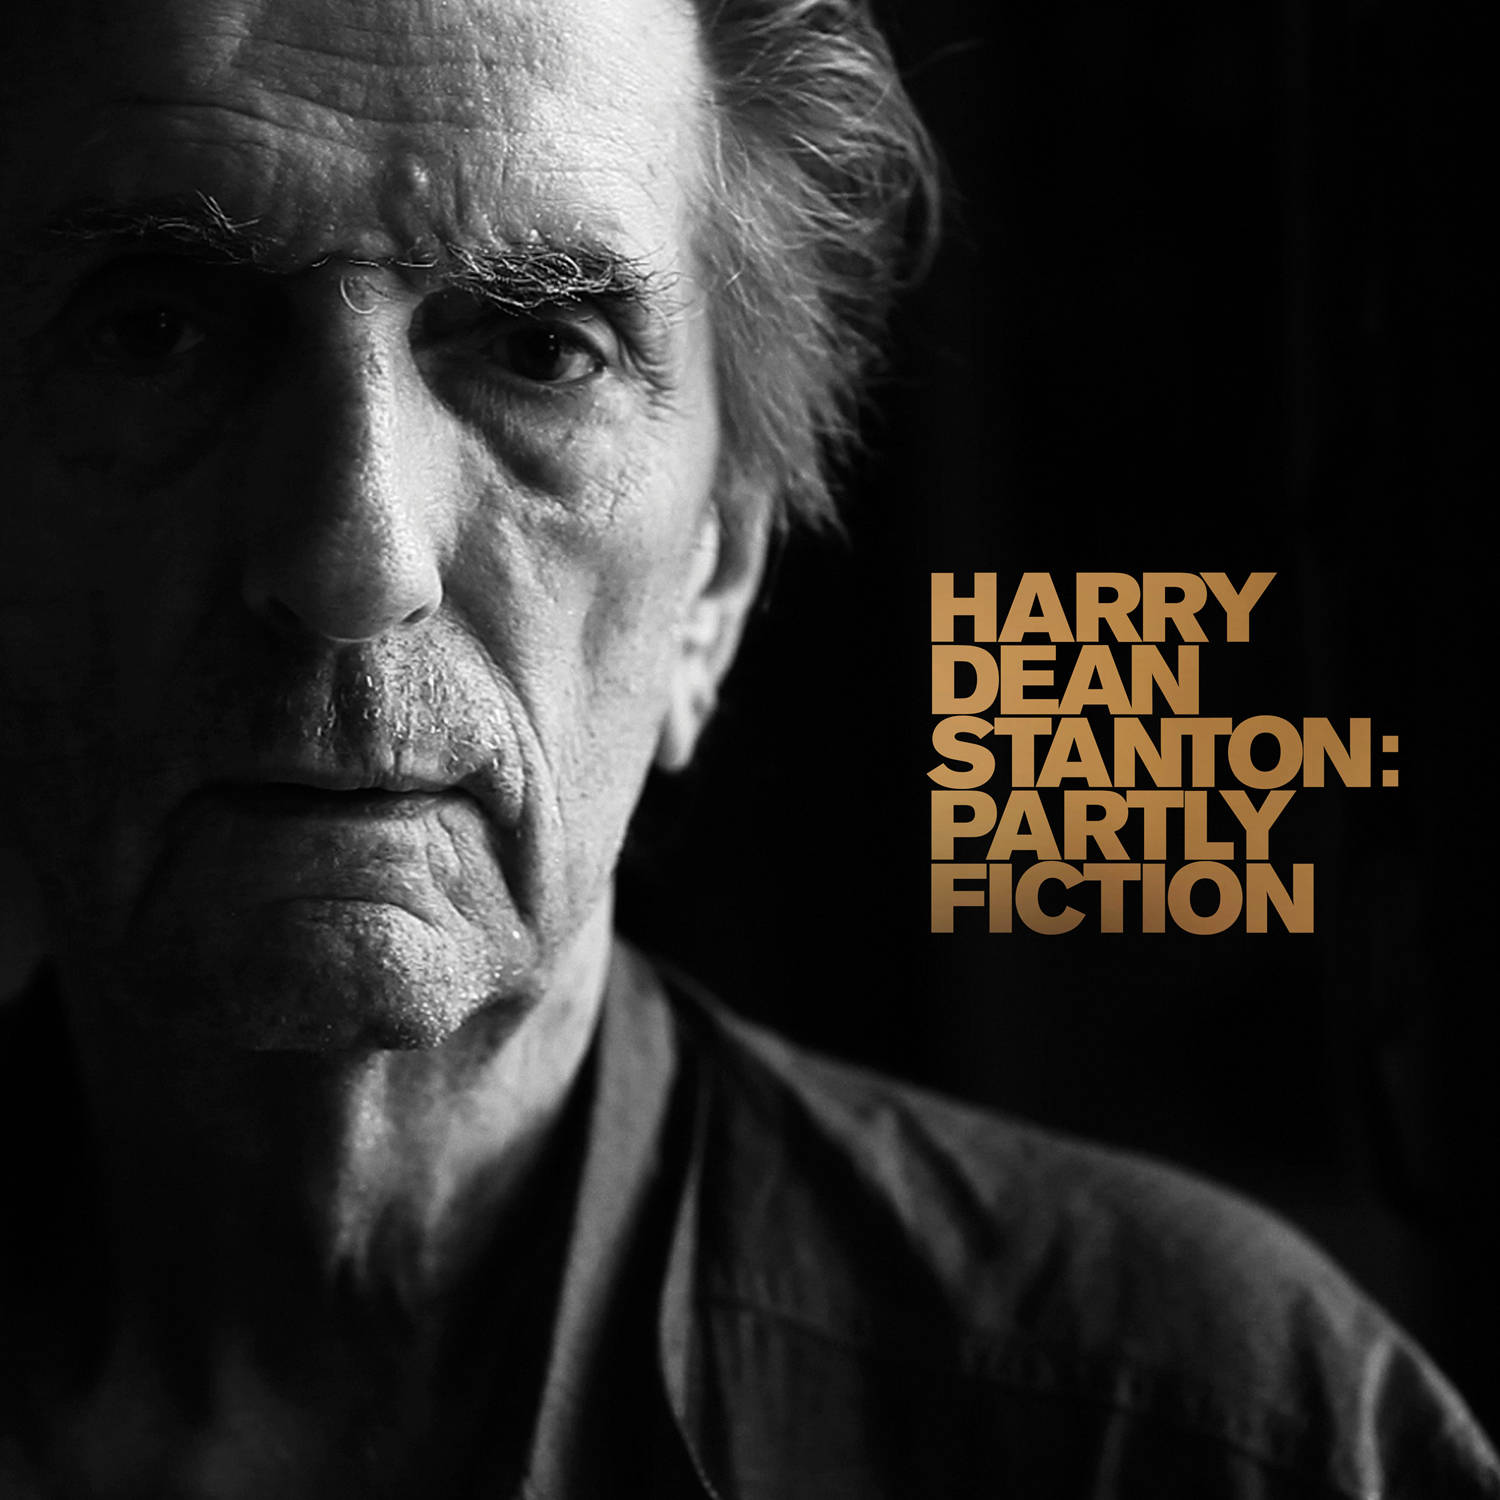 Harry Dean Stanton Partly Fiction Character Poster Wallpaper